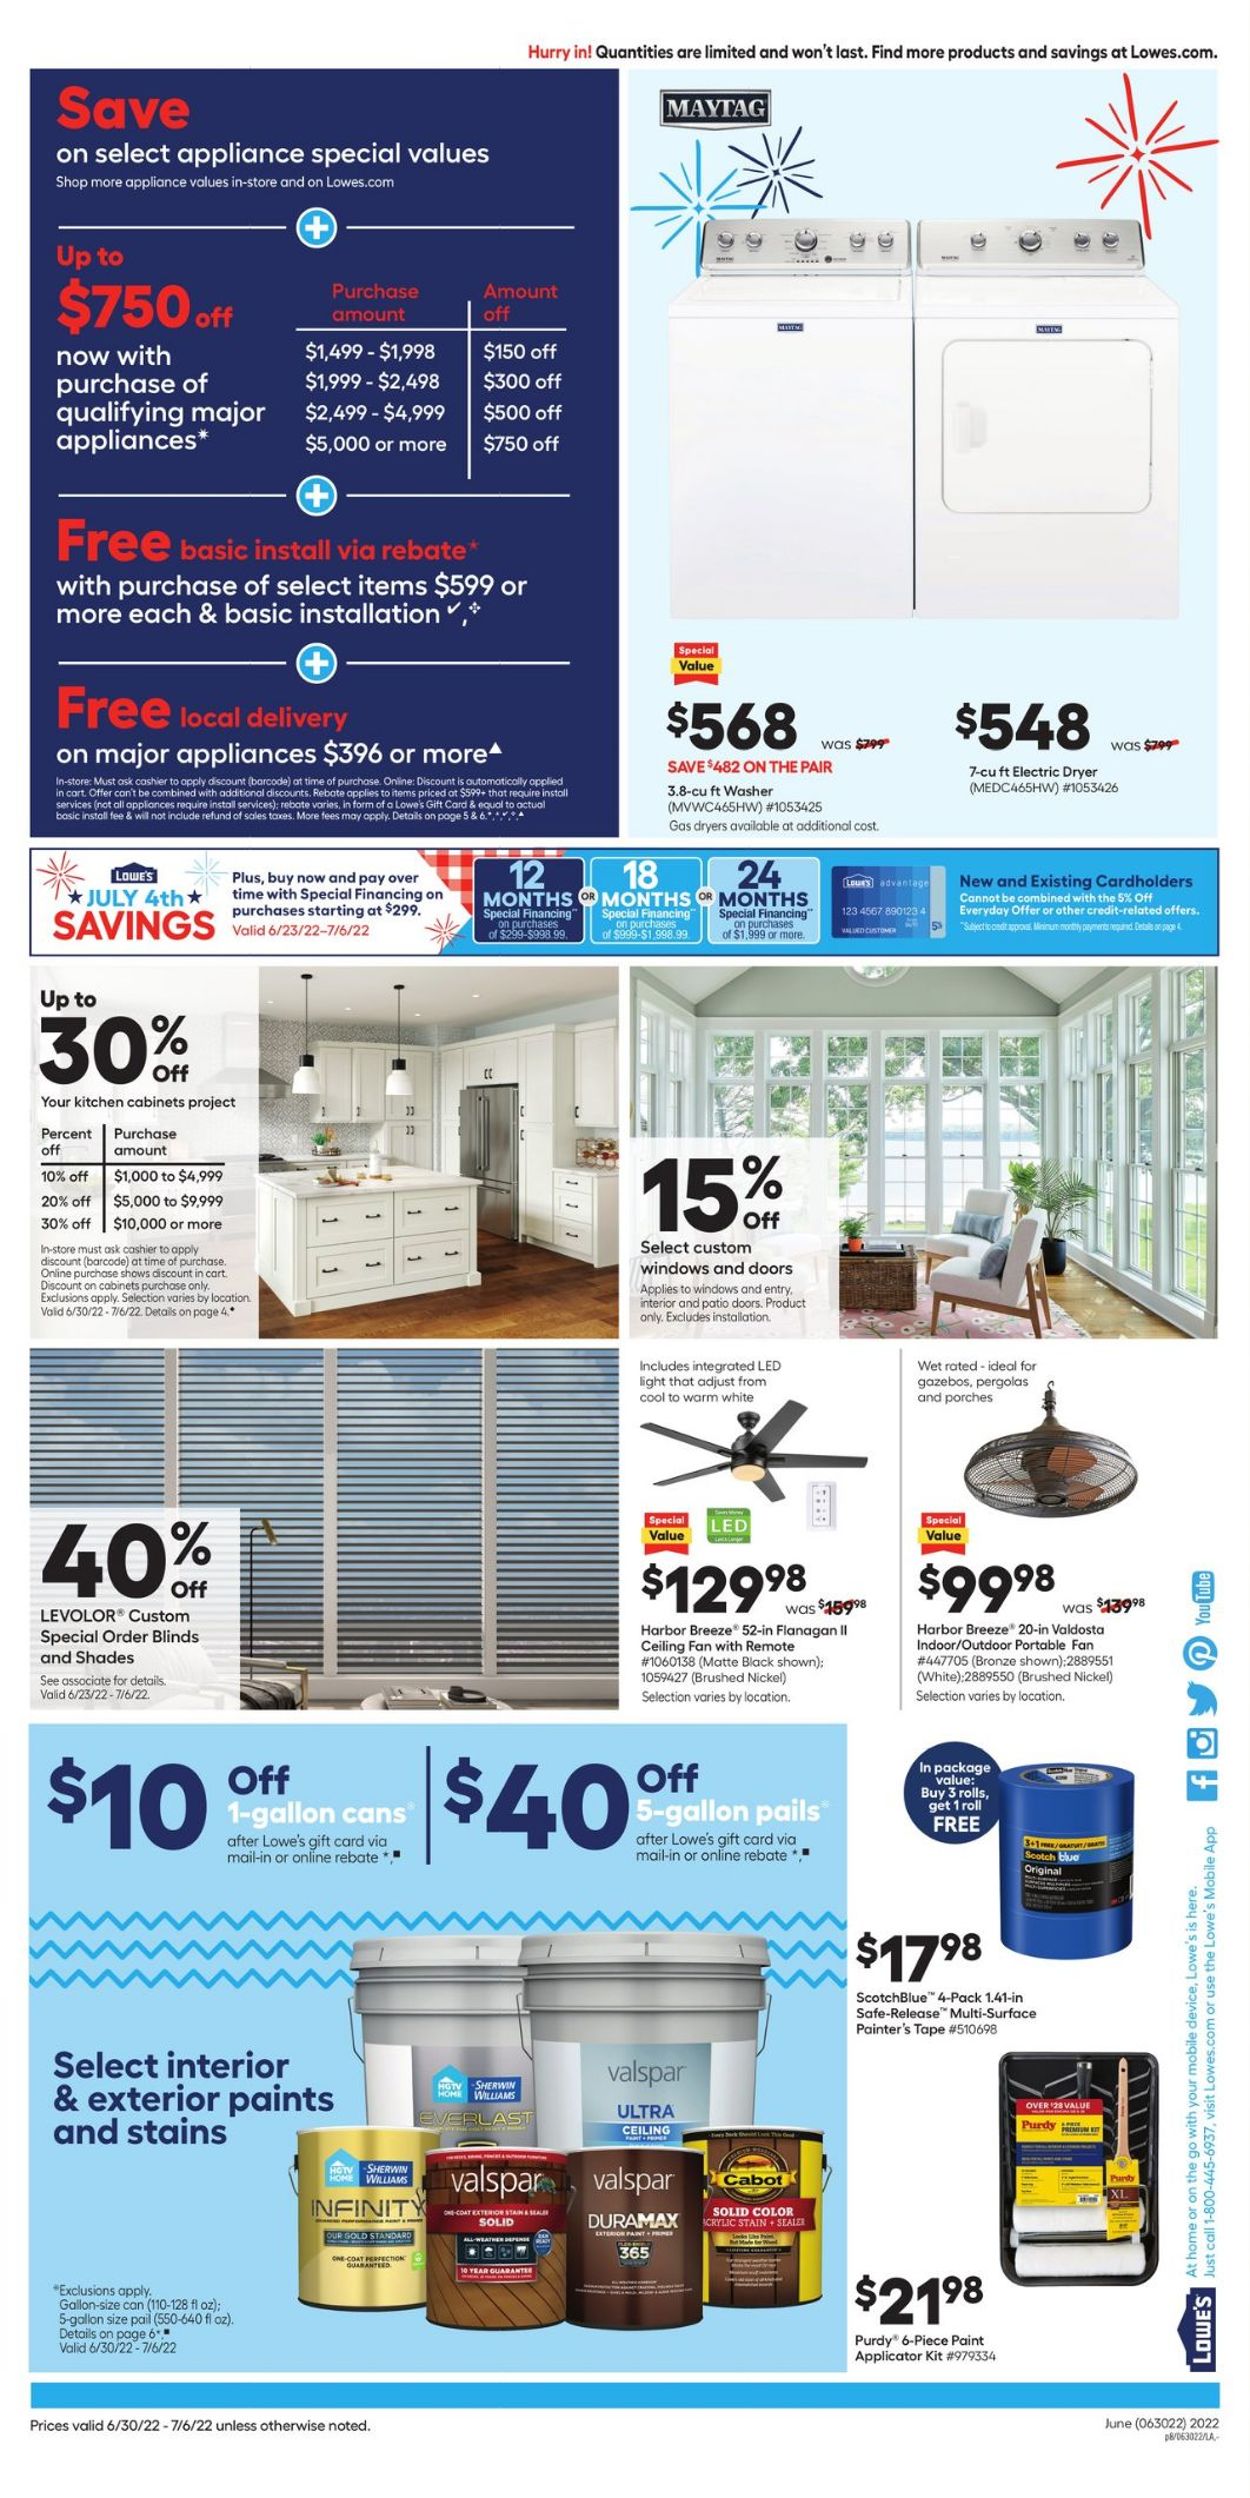 Lowe's 4th of July Sale Current weekly ad 06/30 07/06/2022 [8